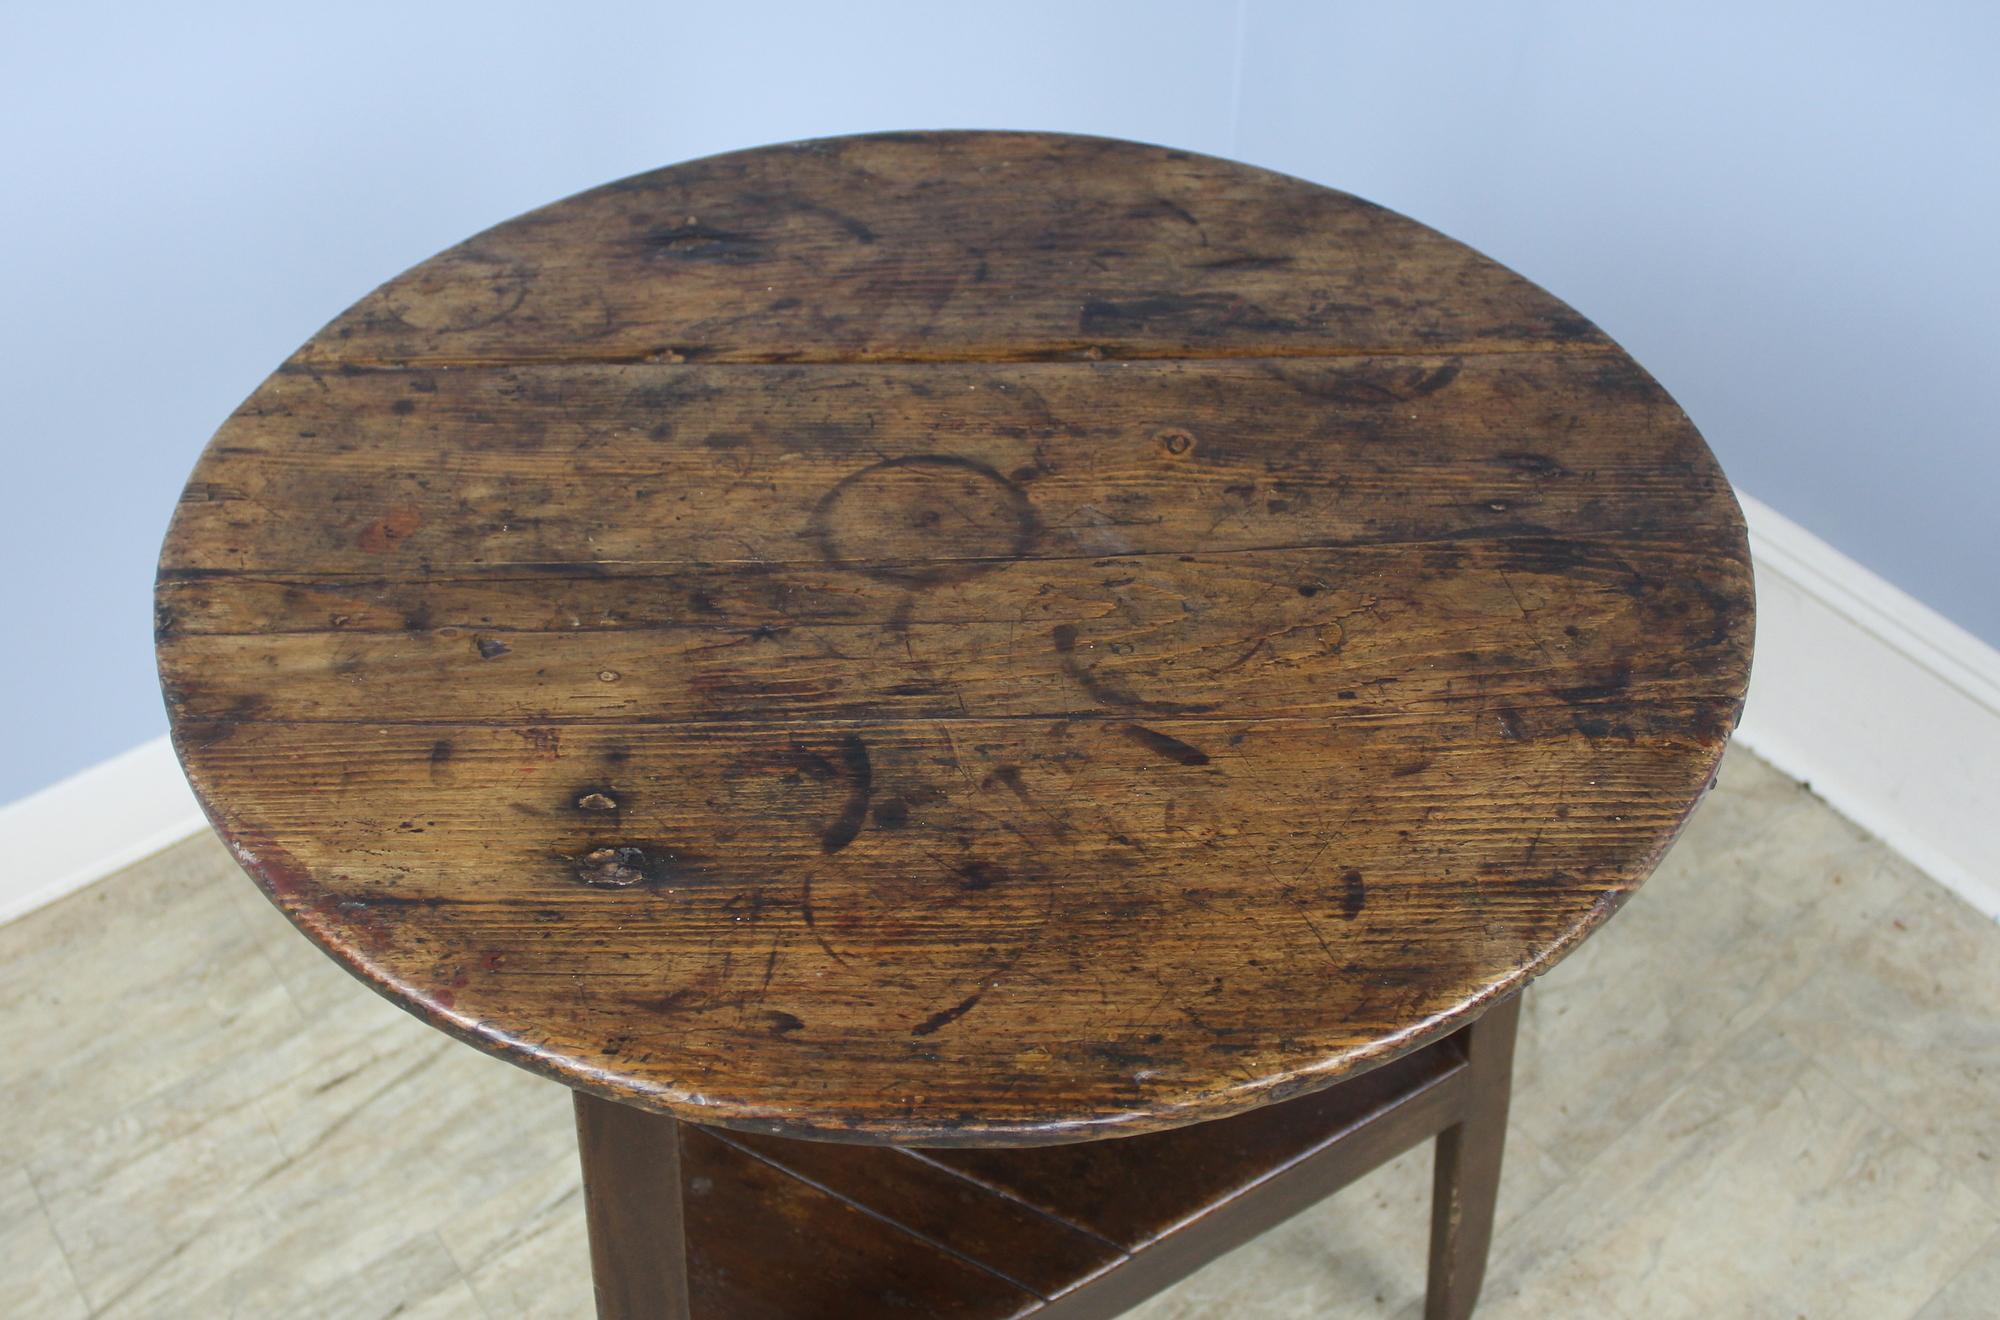 A Welsh oak and pine cricket table with an extravagantly distressed and grained top for a dramatic country look. Typical three-legged table, with each leg having just three sides, and a shelf below. Excellent height for a lamp table, end table or